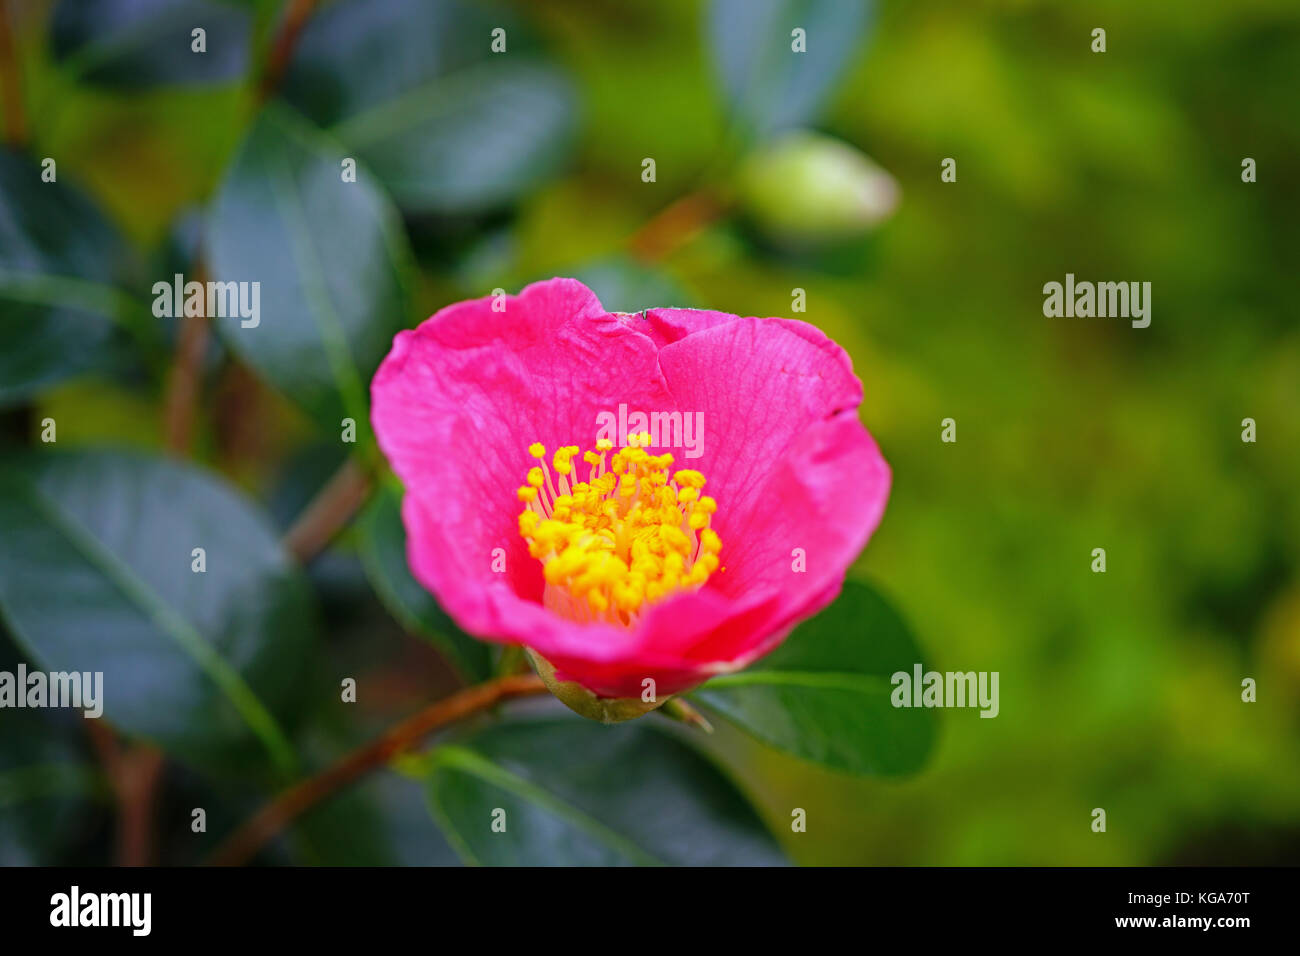 A pink camelia japonica flower in bloom Stock Photo